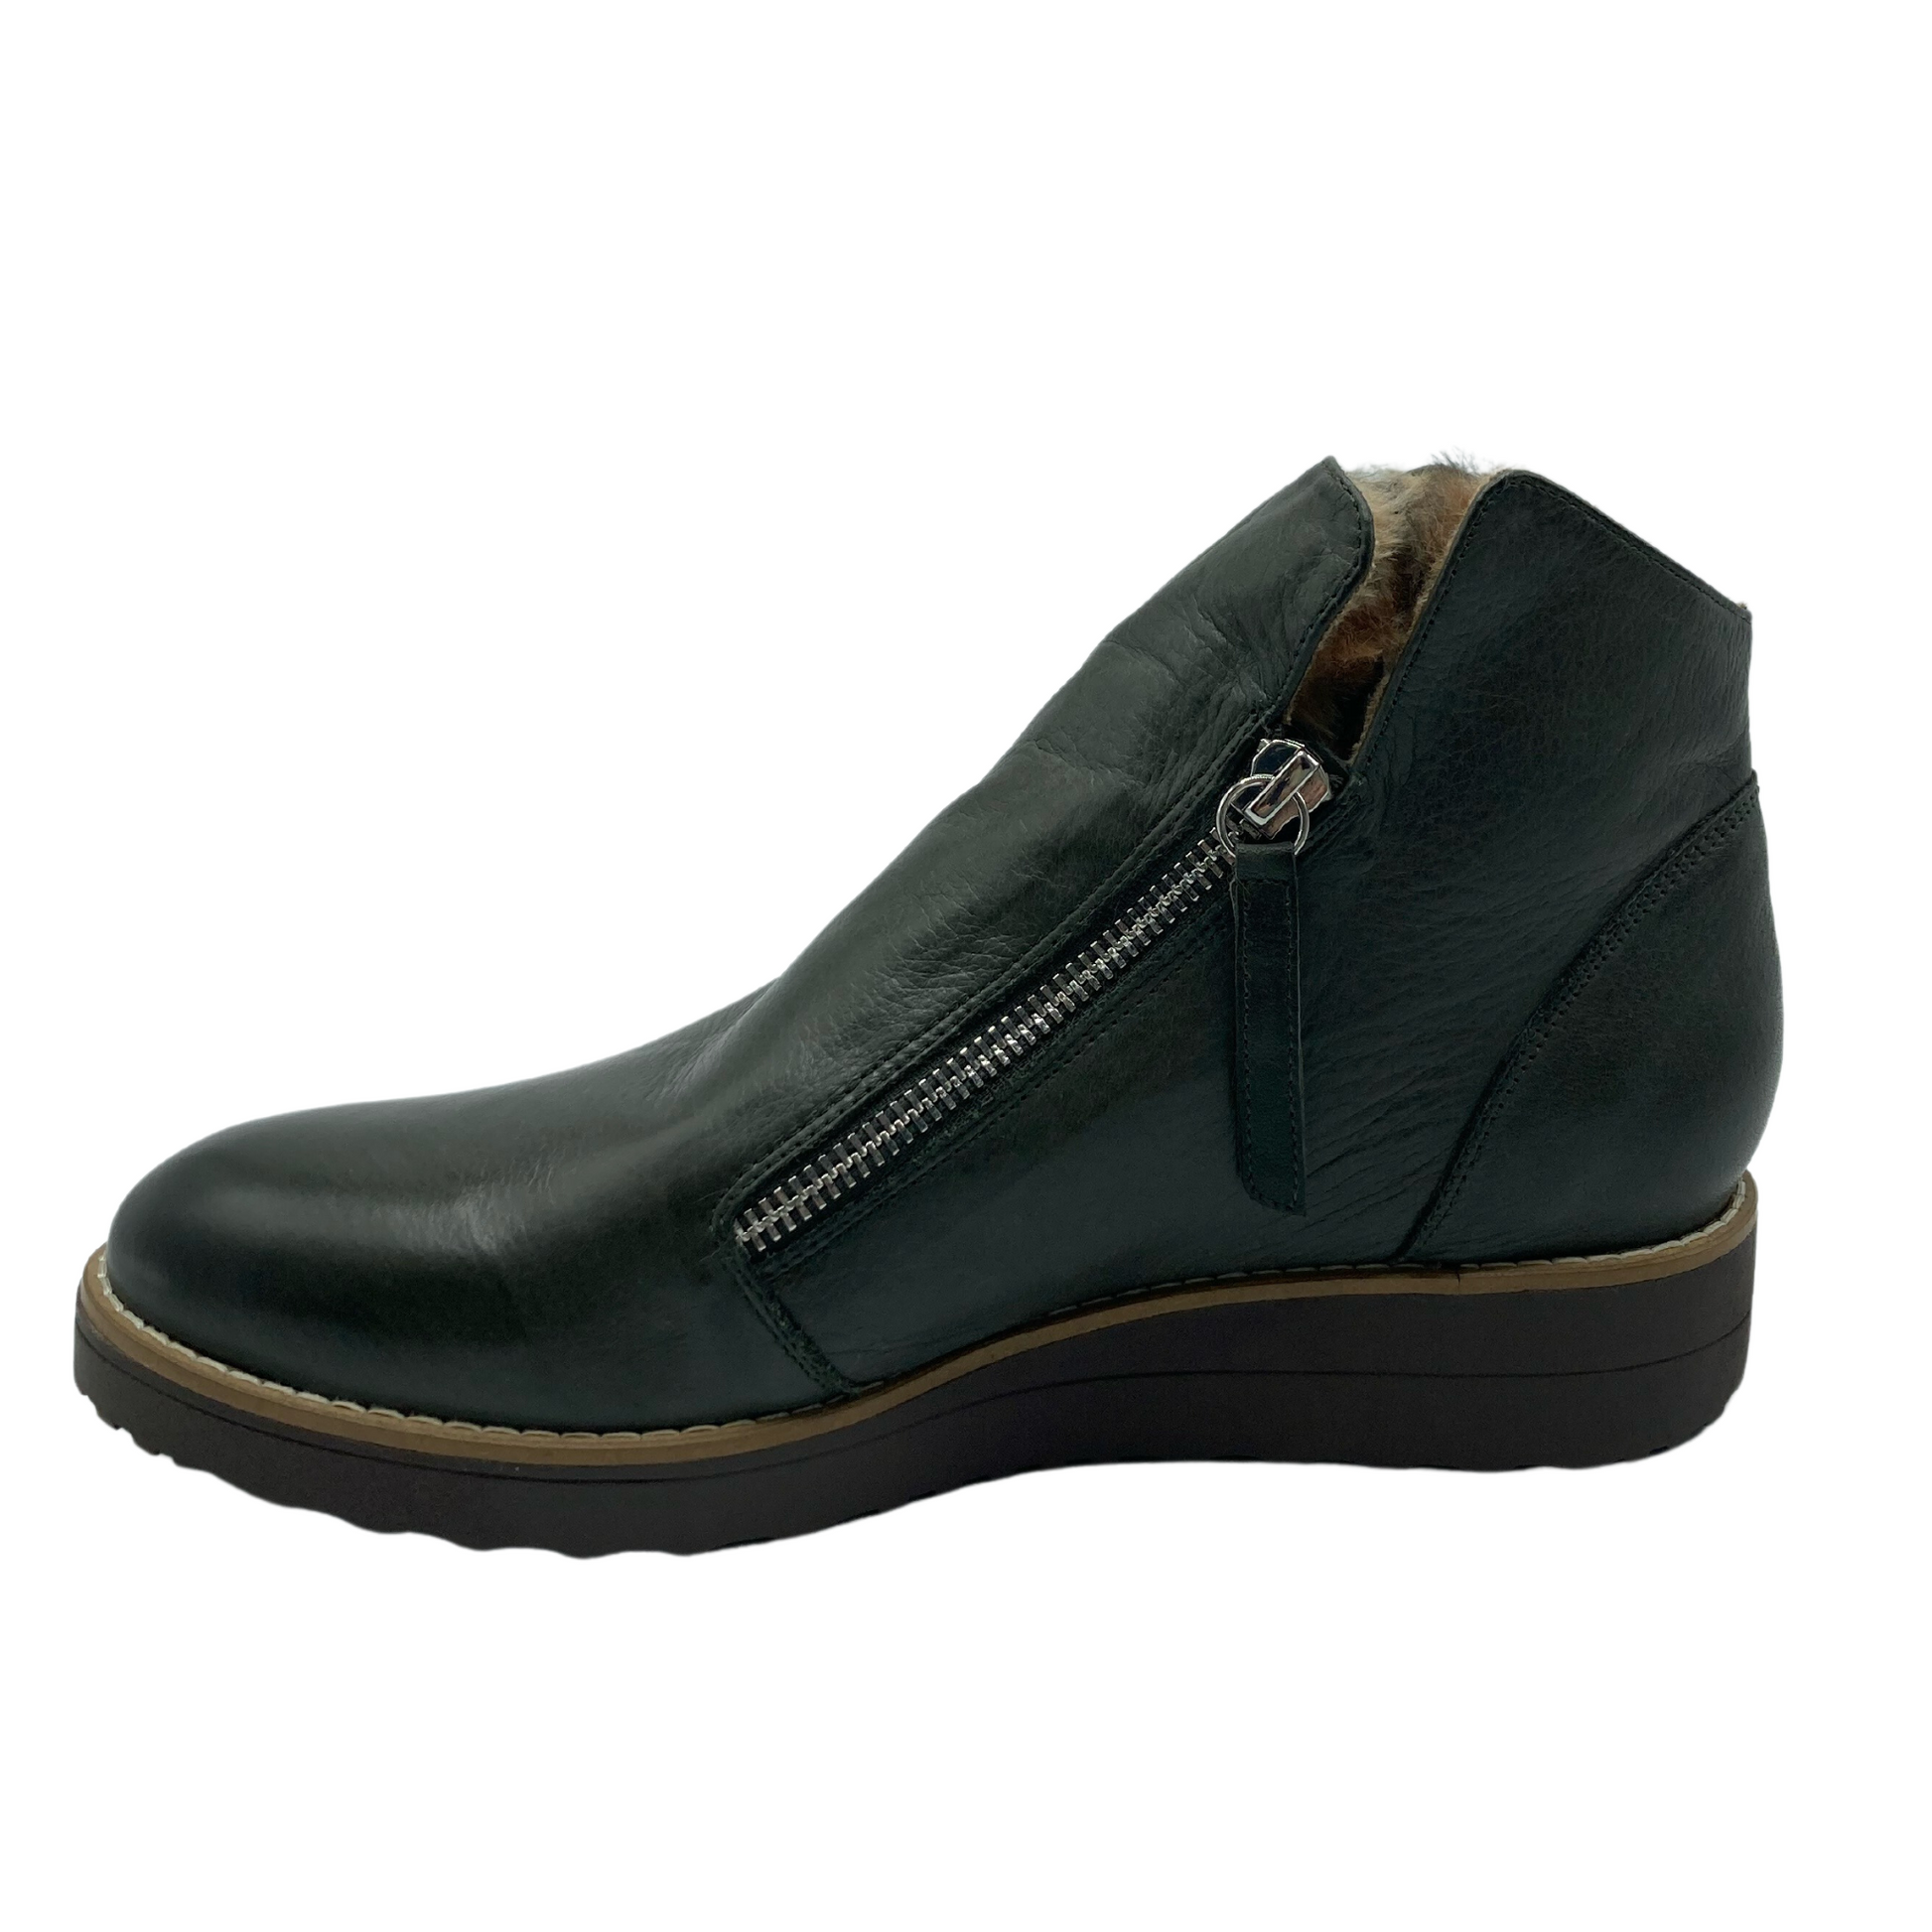 Left facing view of olive green ankle boot with silver zipper closure and brown rubber sole